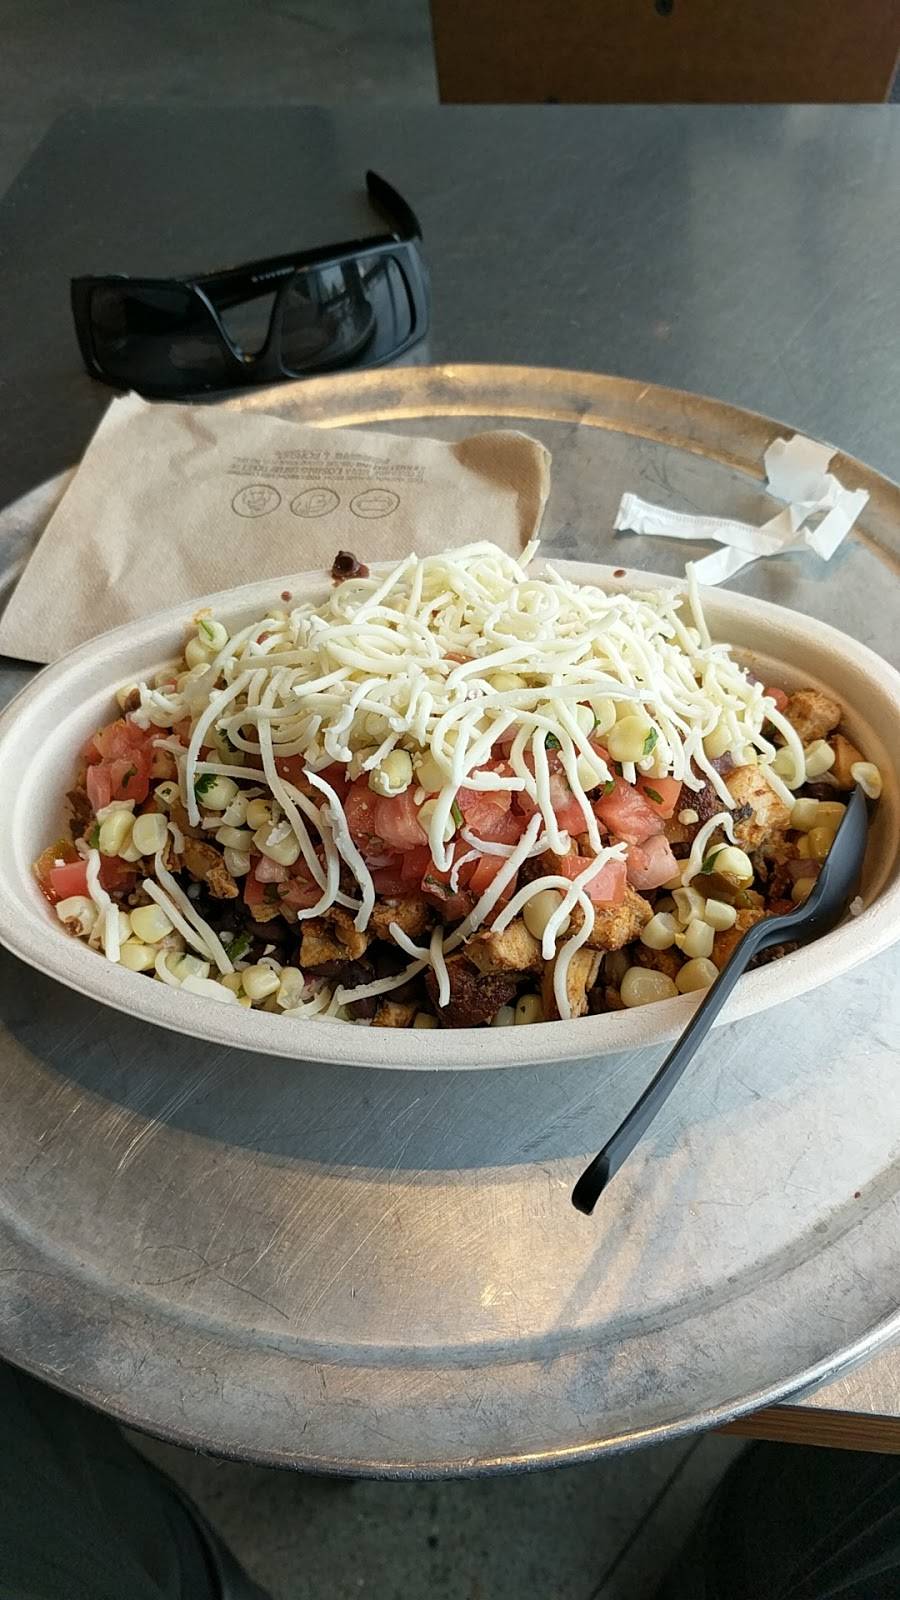 Chipotle Mexican Grill | 40 NJ-17, East Rutherford, NJ 07073 | Phone: (201) 549-5302